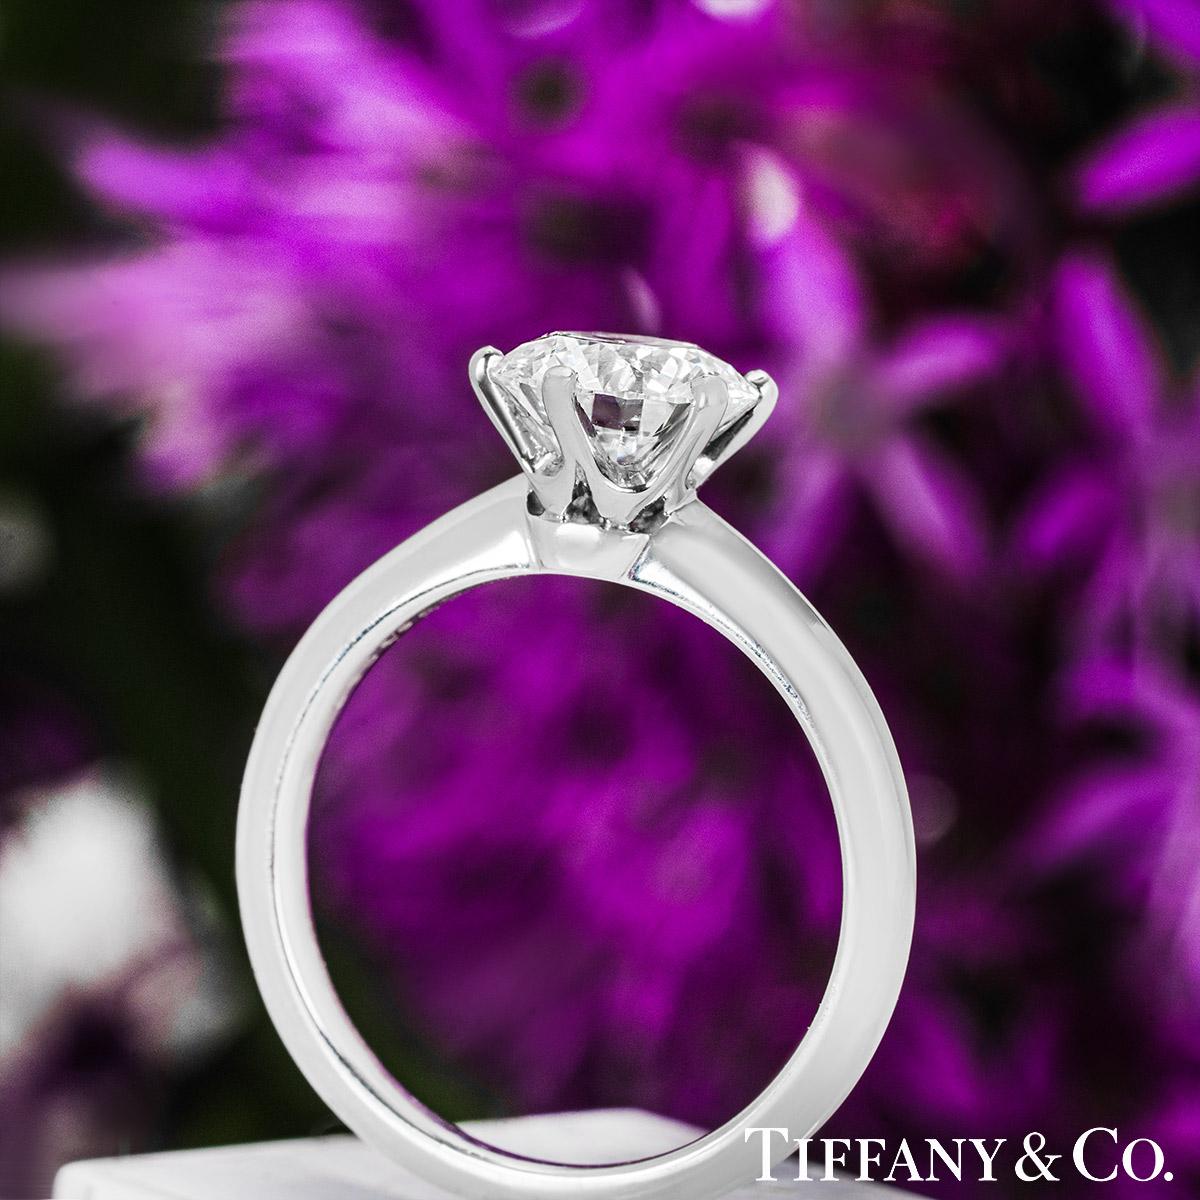 Tiffany & Co. Round Diamond Engagement Ring 1.53 Carat For Sale 1